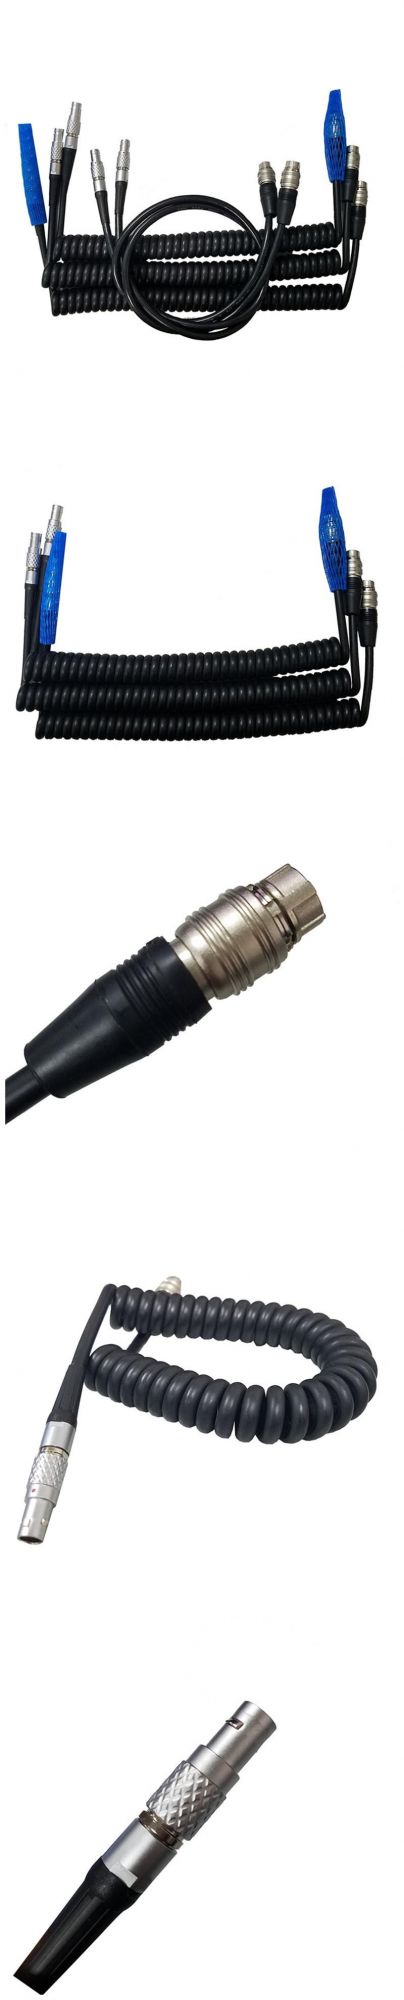 250 People Factory / 2core 3core 5core 1.5mm RoHS PVC PUR Wire Coiled Spiral Cable